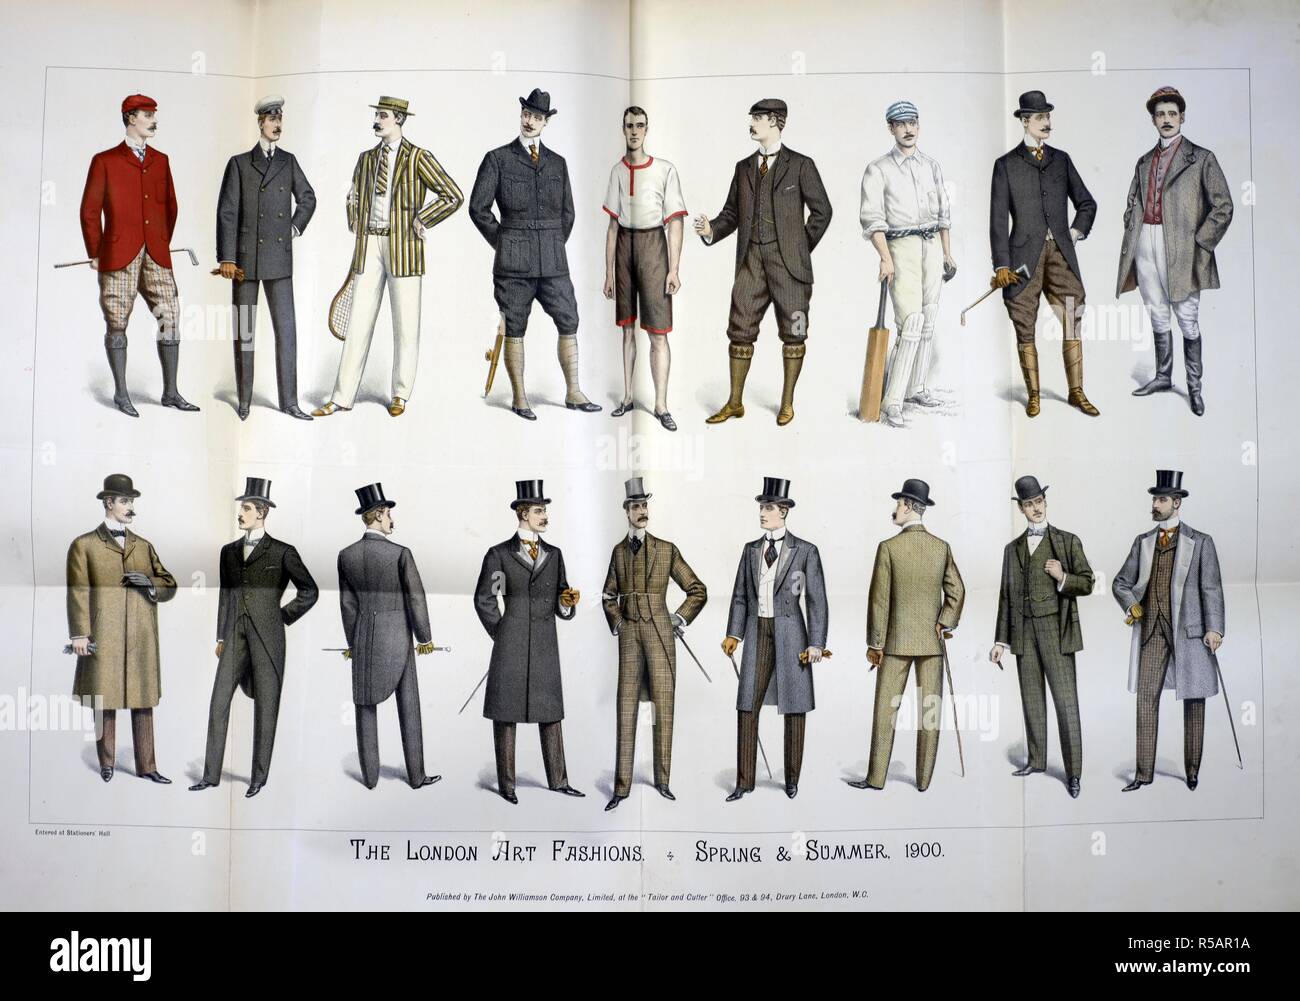 The London art fashions. A gallery showing men's outfits ranging from ...